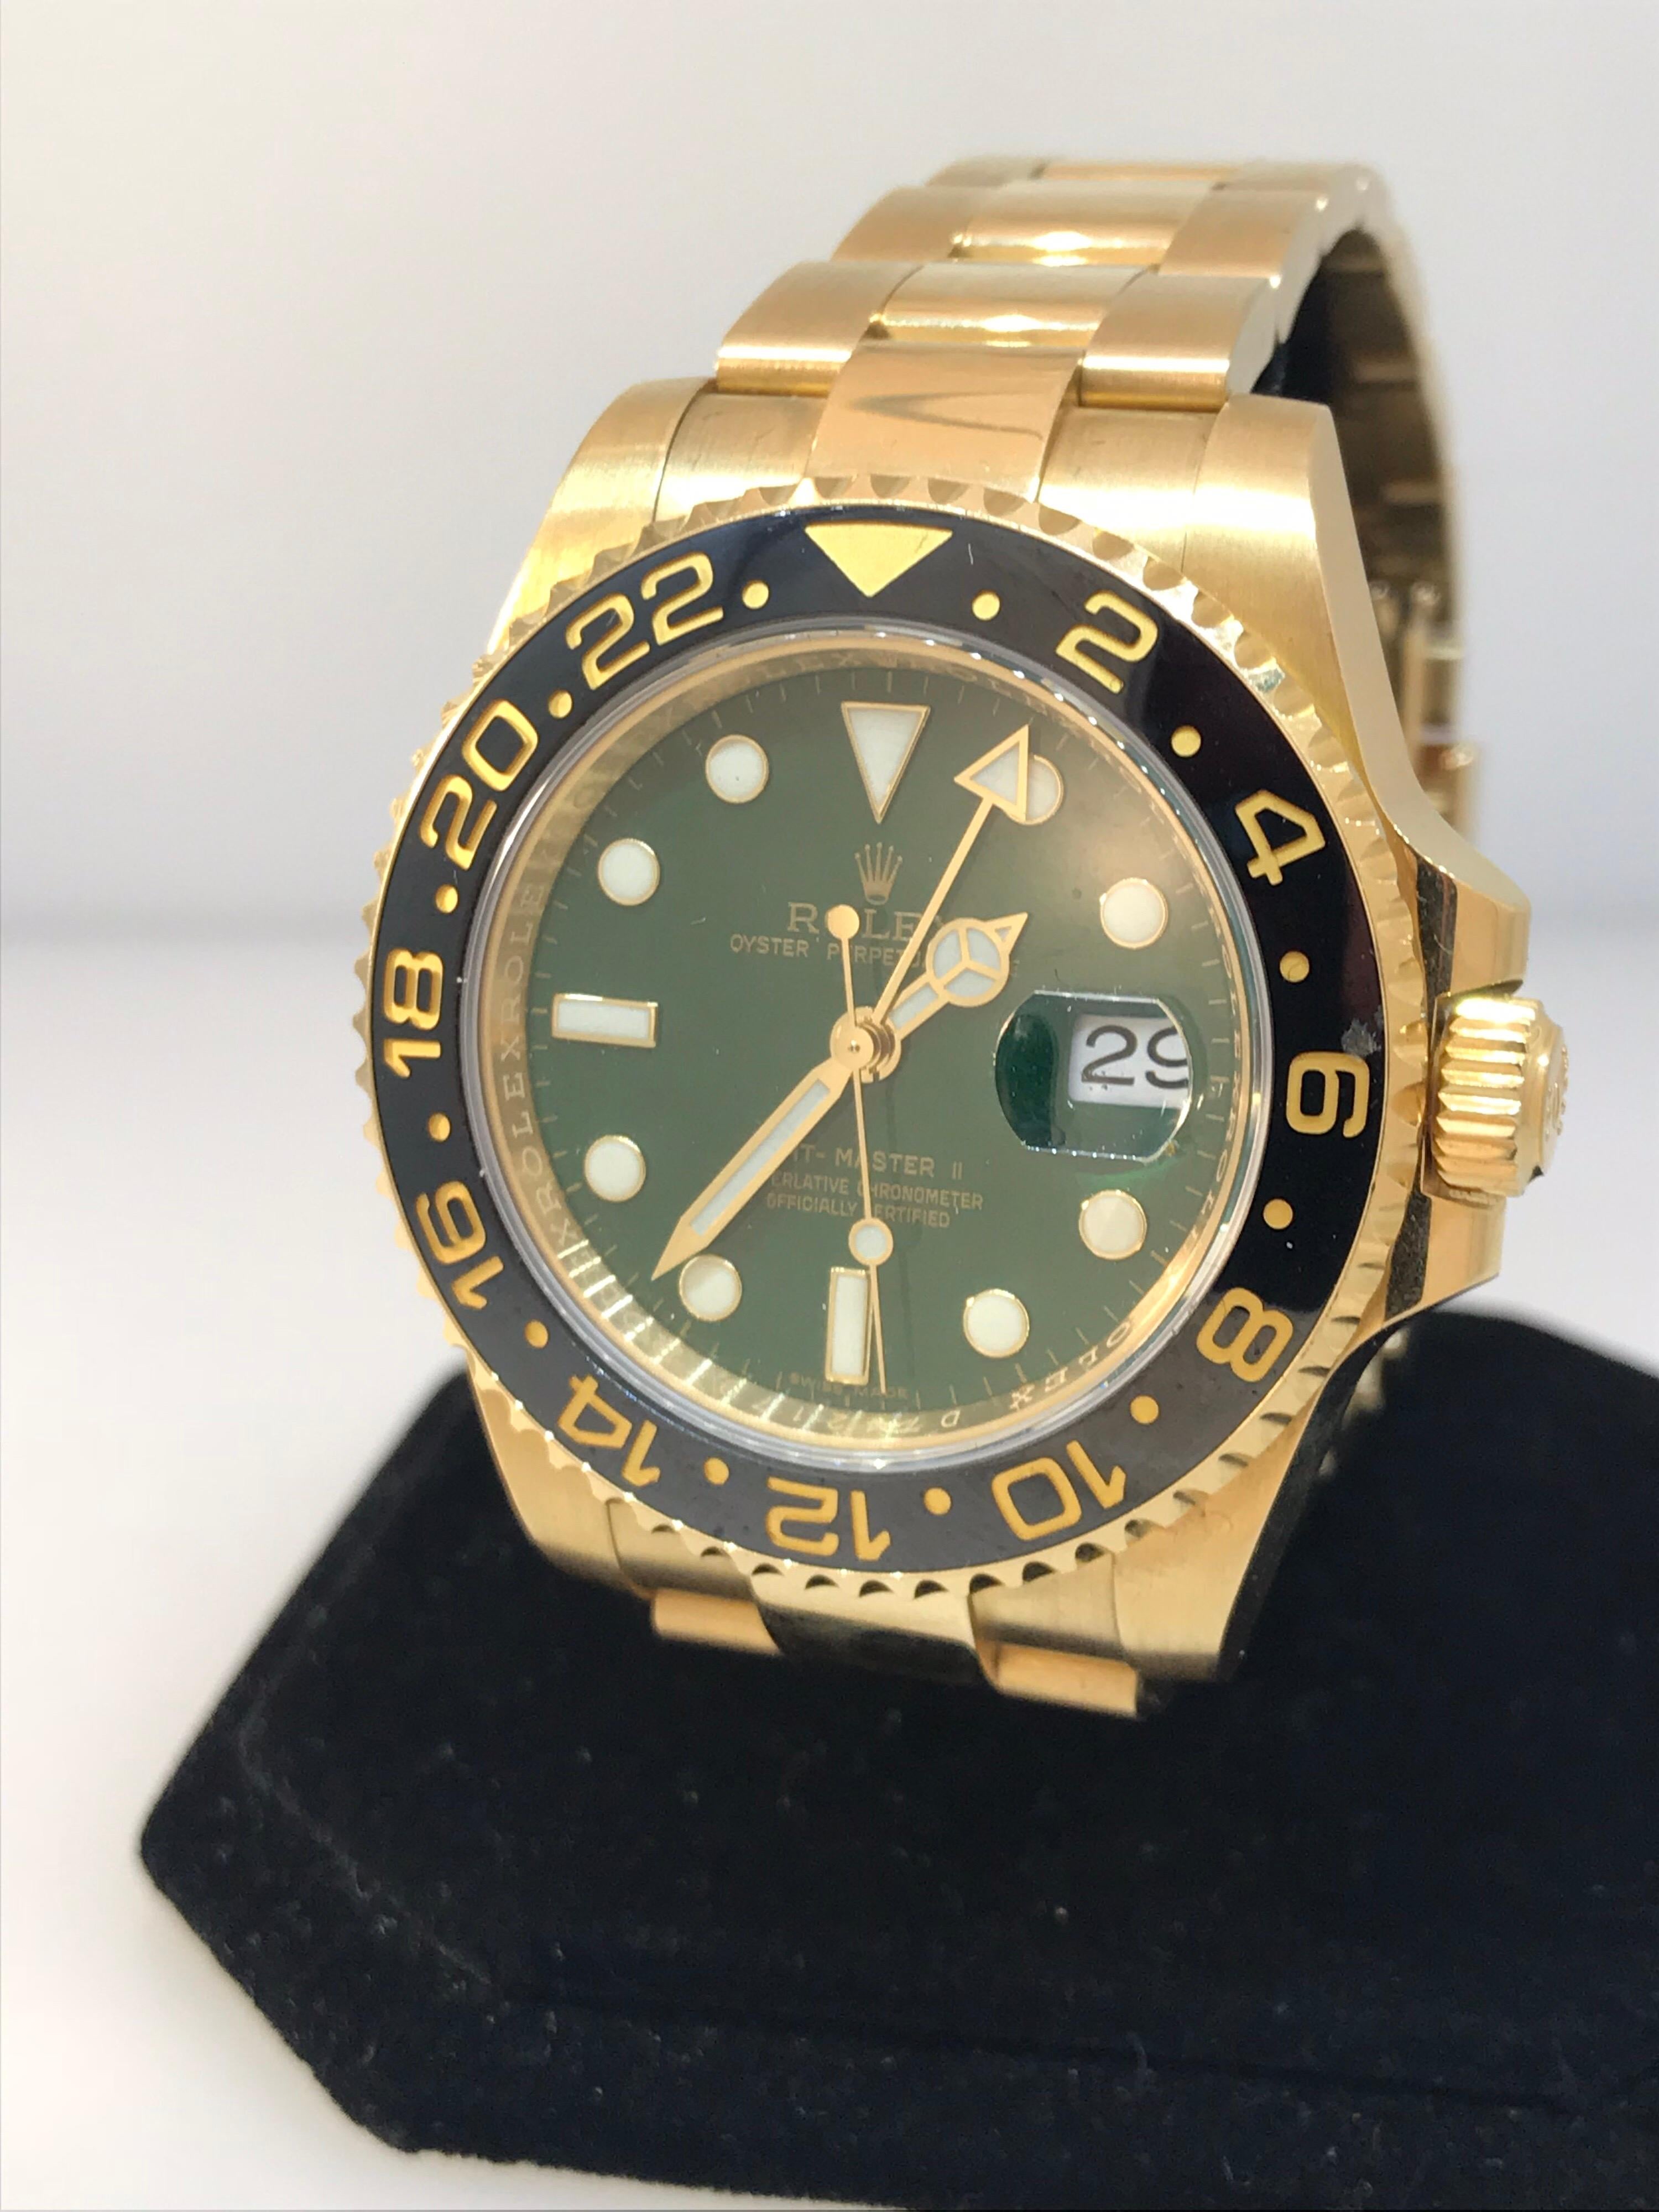 Rolex GMT Master II Men's Watch

Model Number: 116718GSO

100% Authentic

Preowned in Excellent Condition

Comes with original Rolex Box & Papers

18 Karat Yellow Gold Case & Bracelet

Bidirectional Rotating Bezel

Green Dial

Dot Hour